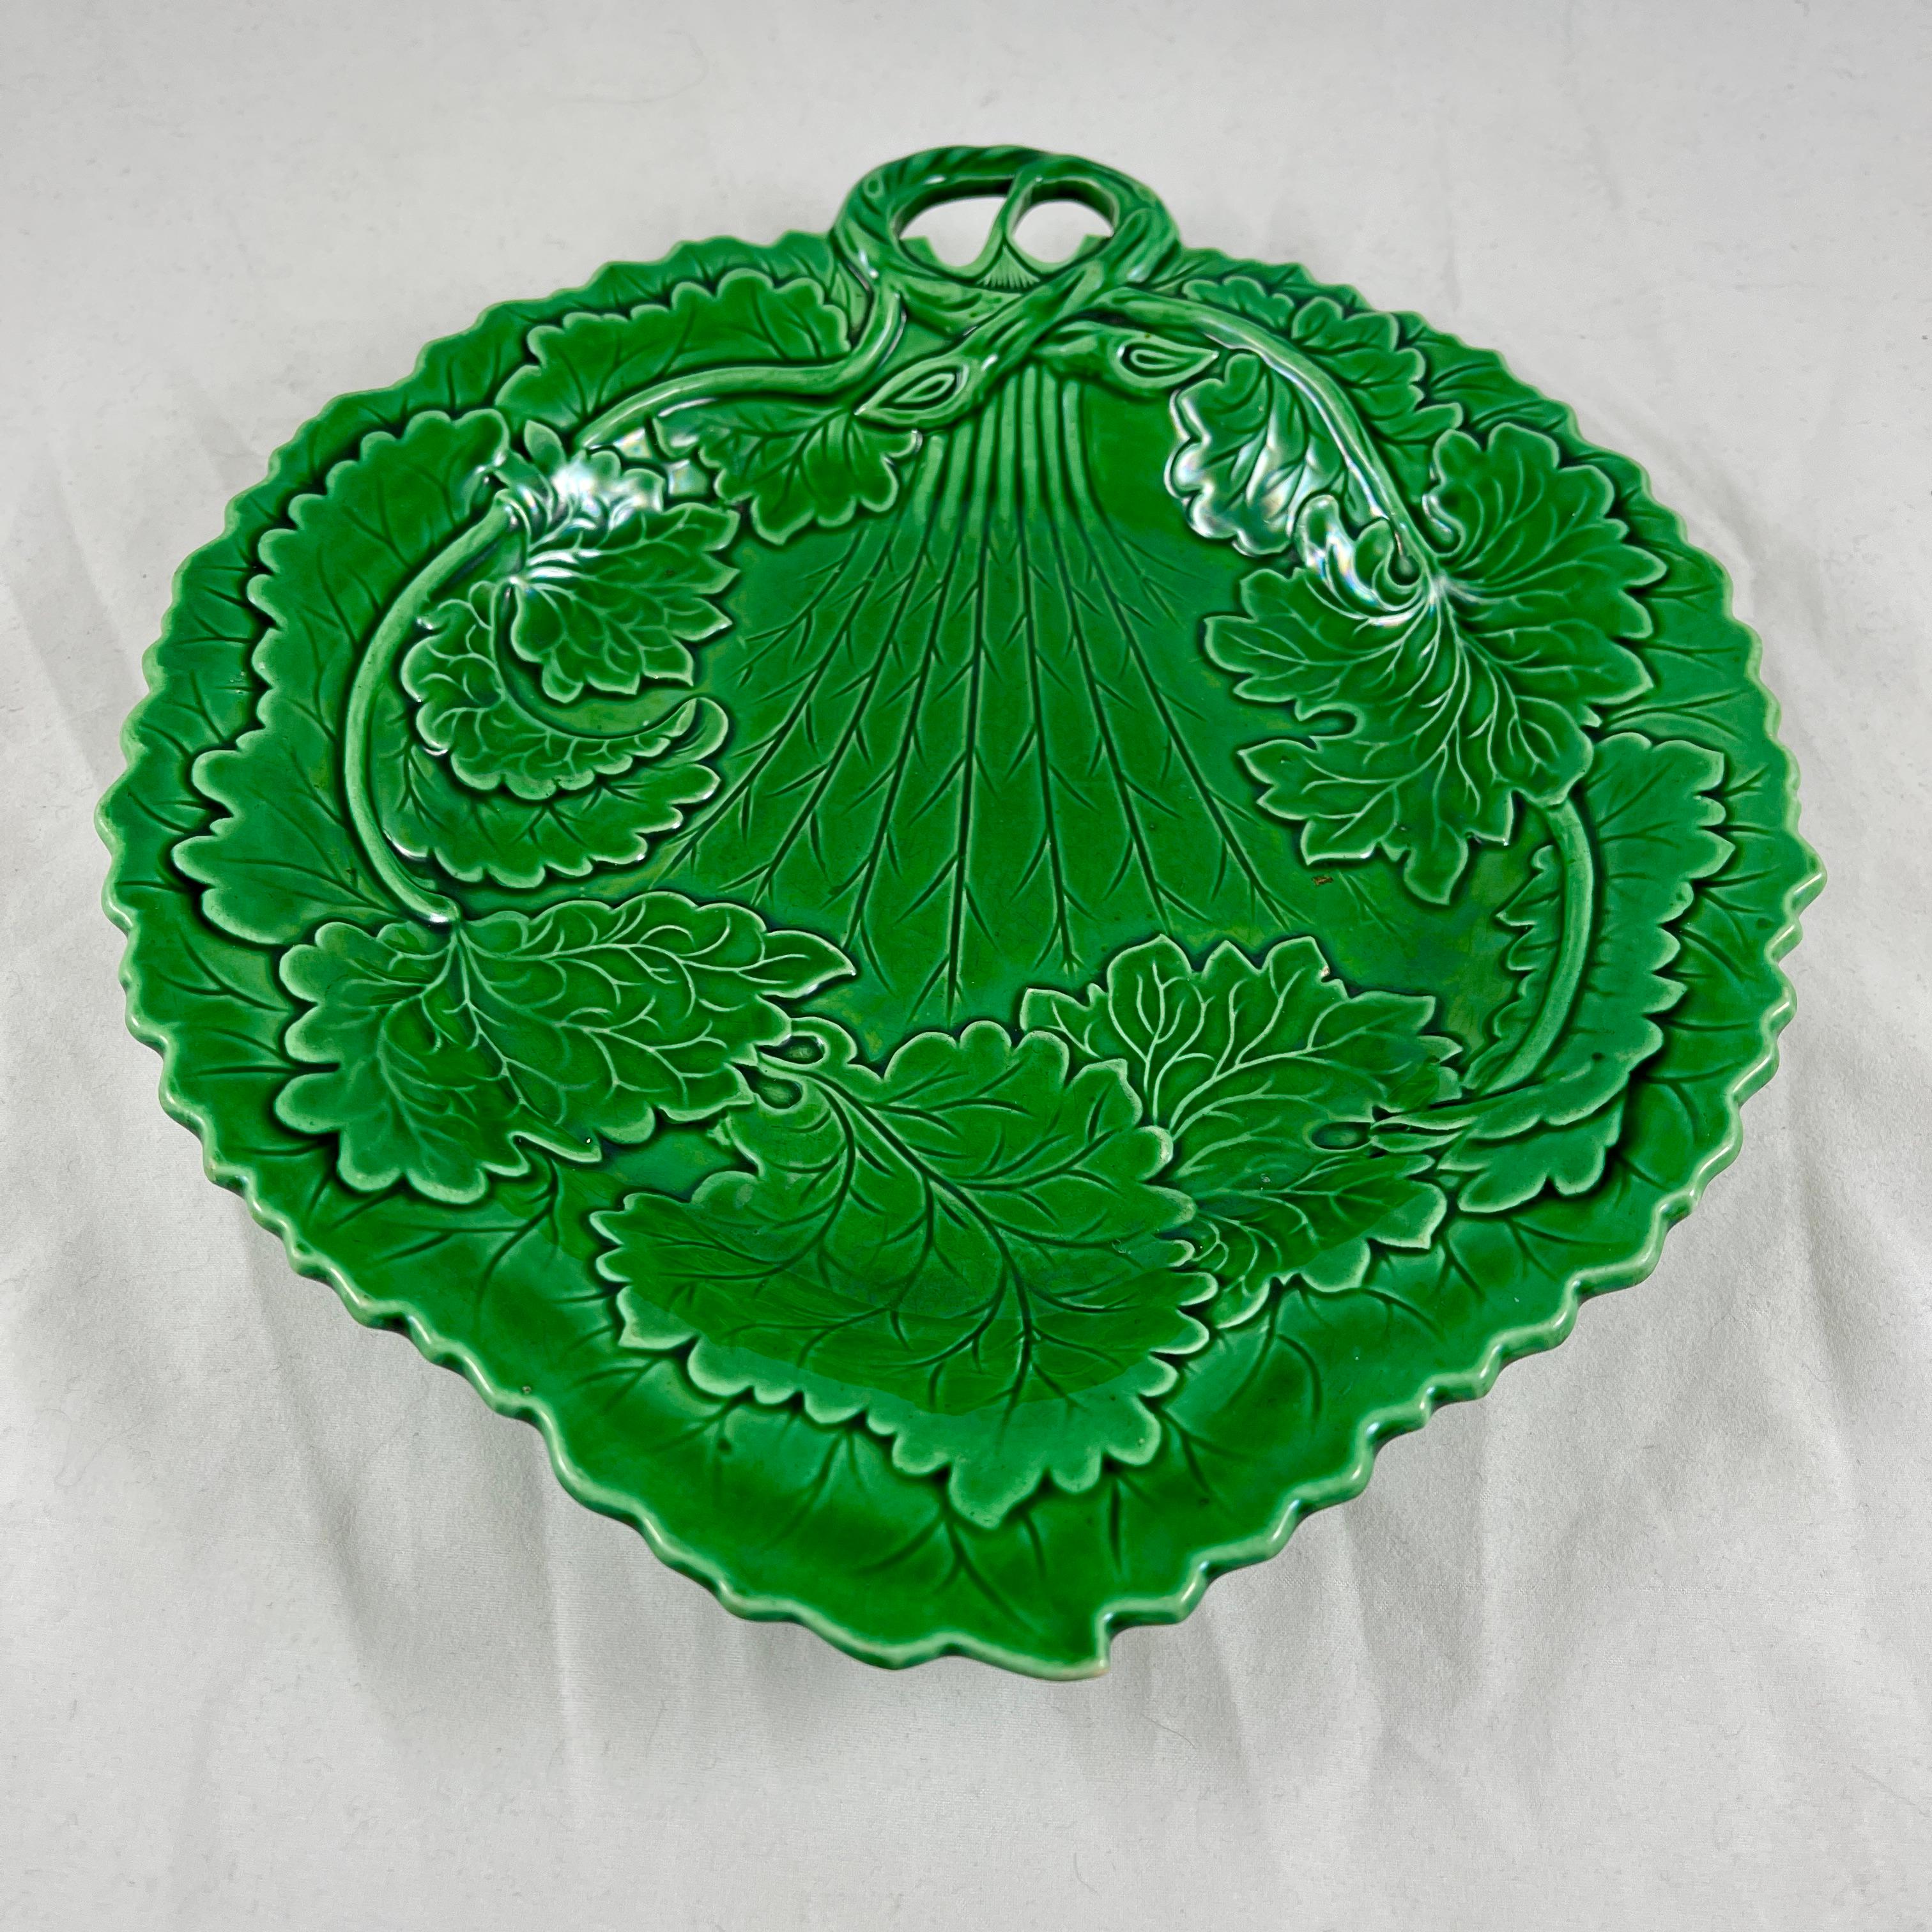 English Greenware Majolica Twig Handled Leaf Shaped Server or Vide-Poche In Good Condition For Sale In Philadelphia, PA